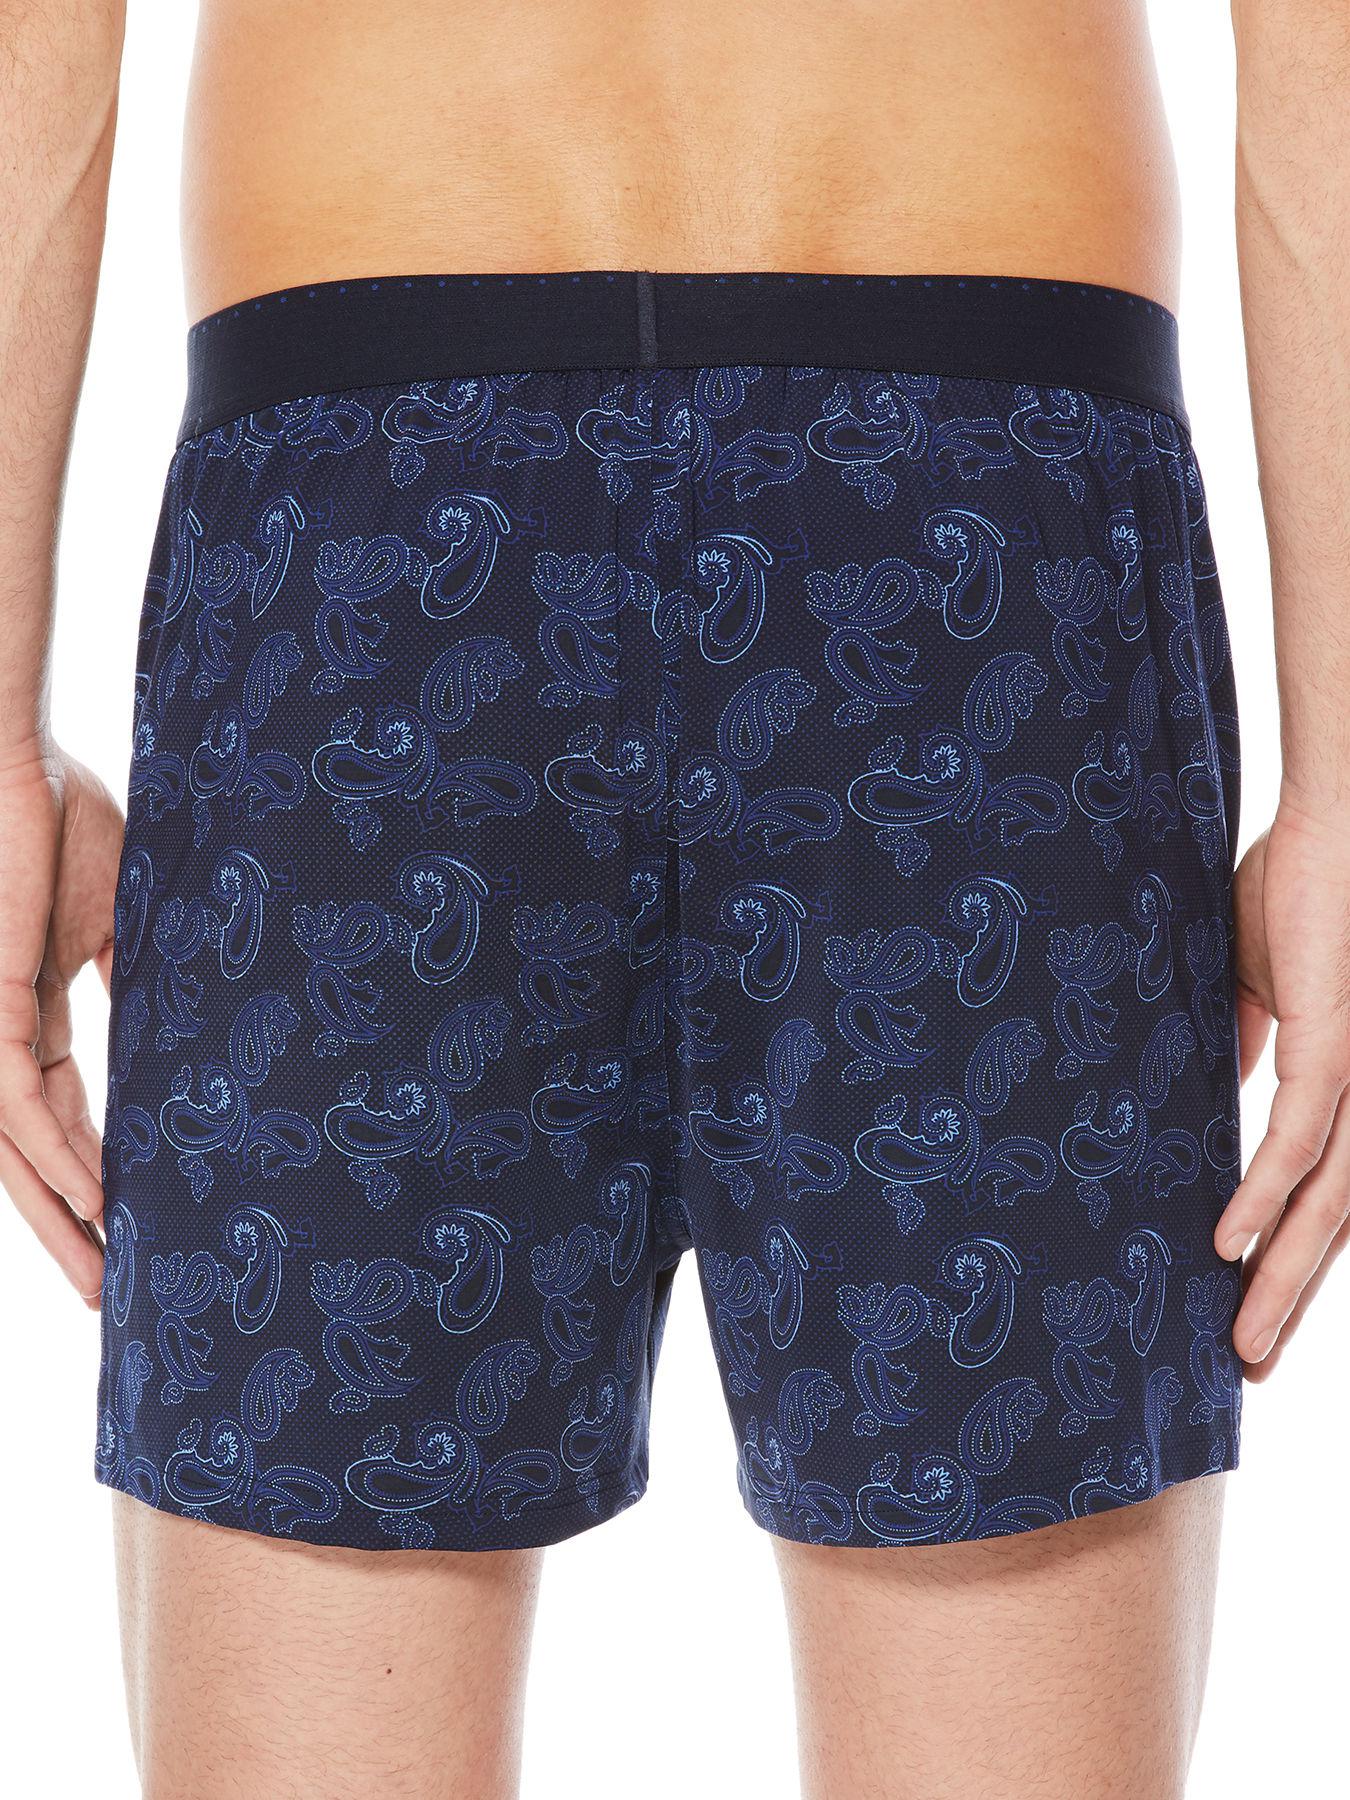 Perry Ellis Synthetic Paisley Dot Boxer Short in Blue for Men - Lyst